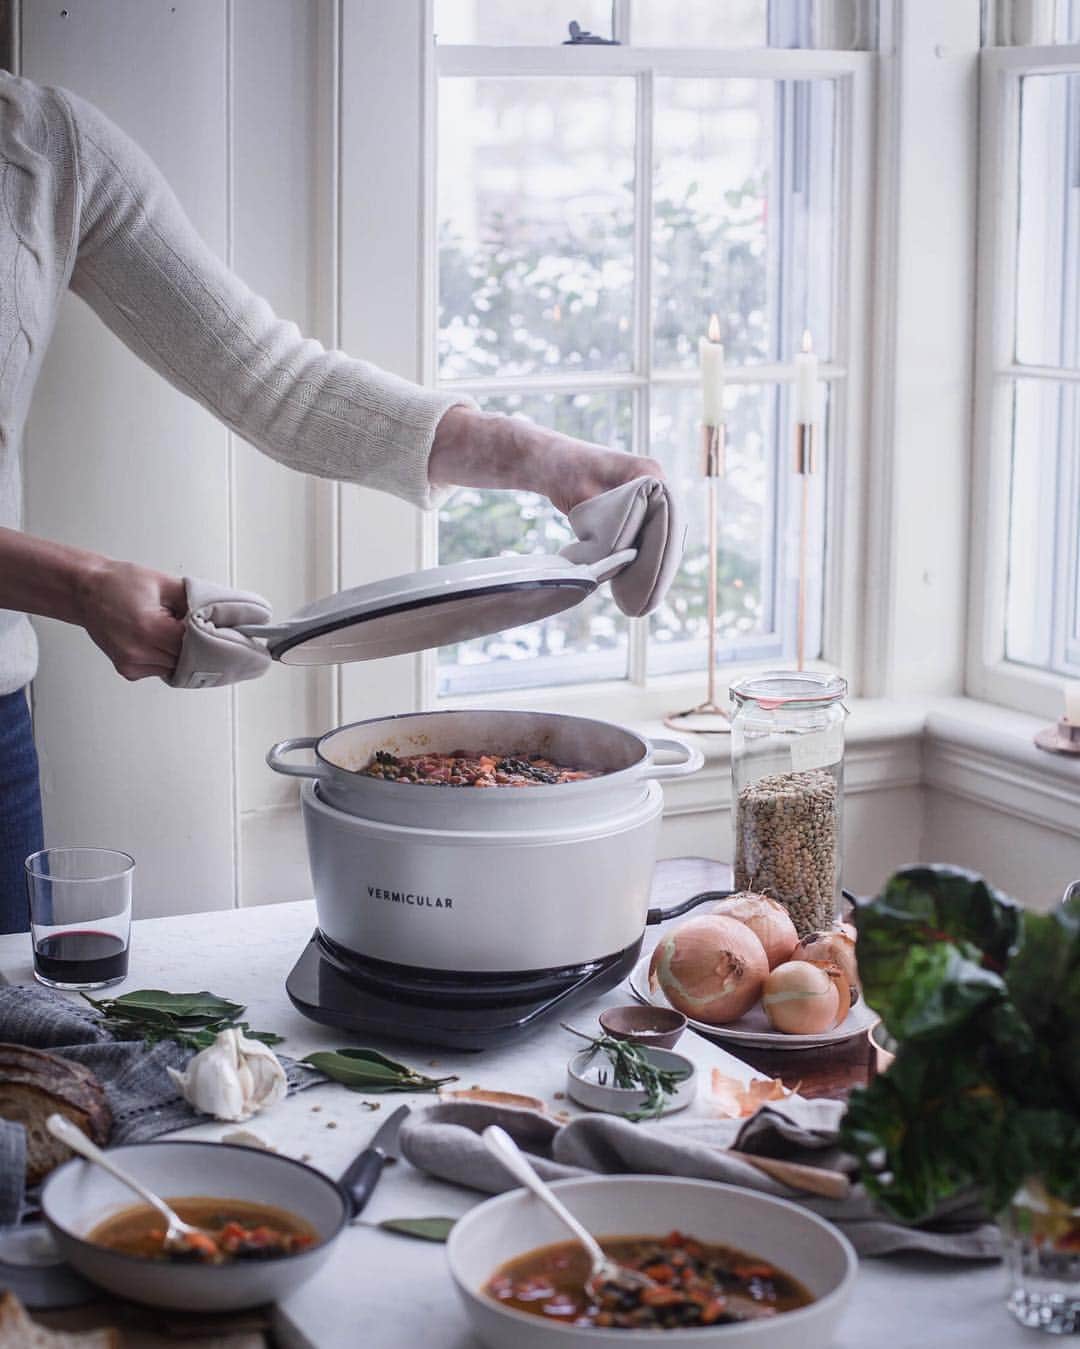 Krissyのインスタグラム：「the last weeks of subzero temperatures have meant days of apple wood fires, chilly trips to the barn & innumerable soups on the menu - essential foods for dead of winter days. We’ve been putting our  @vermicular_global Musui-Kamado pot  through its paces & I really couldn’t love this little pot any more!  Its something of a life-saver (or dinner saver) with a baby in tow. The favorite has been an easy but hearty lentil soup, more or less on rotation (I’ll post the recipe to stories) and fried eggs over rice (the  Musui-Kamado does rice so perfectly) .  Now I’ve my eye on making a chocolate sponge cake in the the Musui-Kamado because chocolate sponge falls into the category of appropriate below freezing temperature foods and, Valentine’s Day .  Its been an invaluable addition to our kitchen and Im loving that I can pop everything into the pot, lid on, set the timer & walk away. As a new mamma, I’m learning that these sorts of things are invaluable .  Head to stories for the lentil soup recipe, a good something to make for Monday dinner. I’ll list the ingredients needed below . . . Ingredients list : 1 yellow onion 3 cloves garlic  2 fresh bay leaves  8/10 fresh thyme sprigs  3 Tablespoons olive oil  1 Tablespoon cumin 3 carrots 1 cup green or brown lentils 1 bunch kale 4 cups stock 1 cup water  28oz can diced tomatoes (drained) . . . . #sponsored #vermicular #vermiculture #momentslikethese #onthetable #everydayproject #inmykitchen #thefeedfeed #lentilsoup #meatlessmonday #kitcheninspo #embracingtheseasons #simplejoys #todayslovely #theeverydayproject #postitfortheaesthetics #livethelittlethings #seekthesimplicity #artofslowliving #myeverydaymagic #embracingaslowerlife」